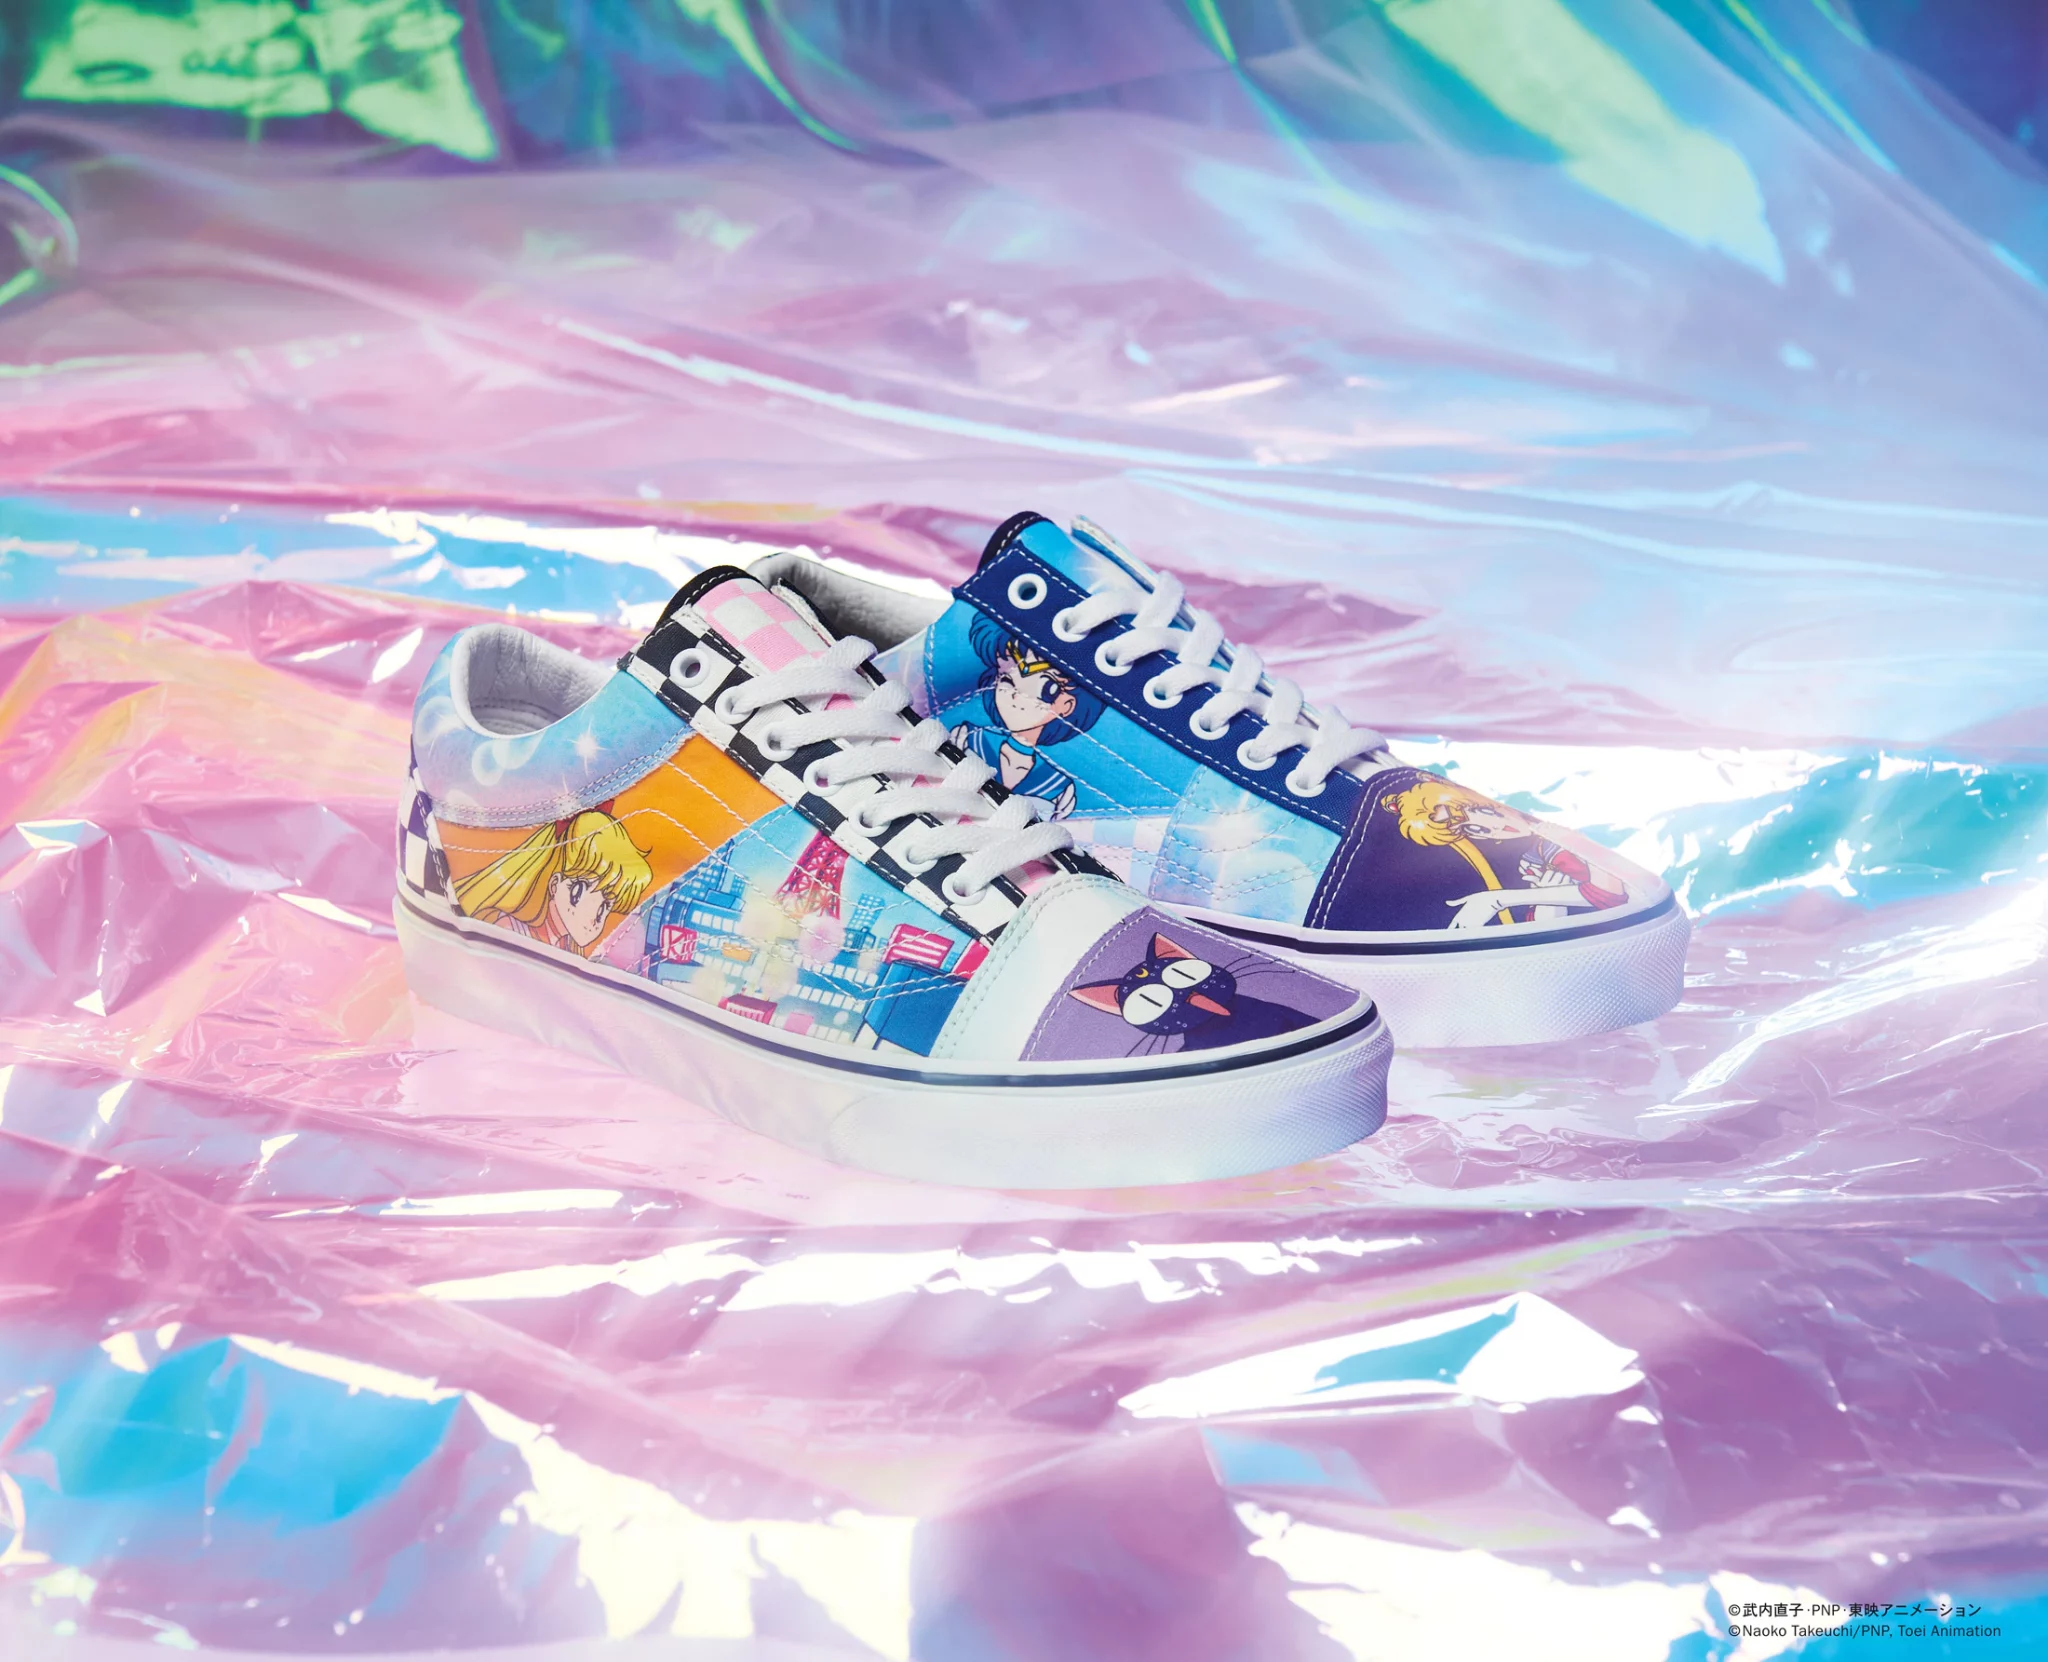 vans sailor moon collection 8 scaled